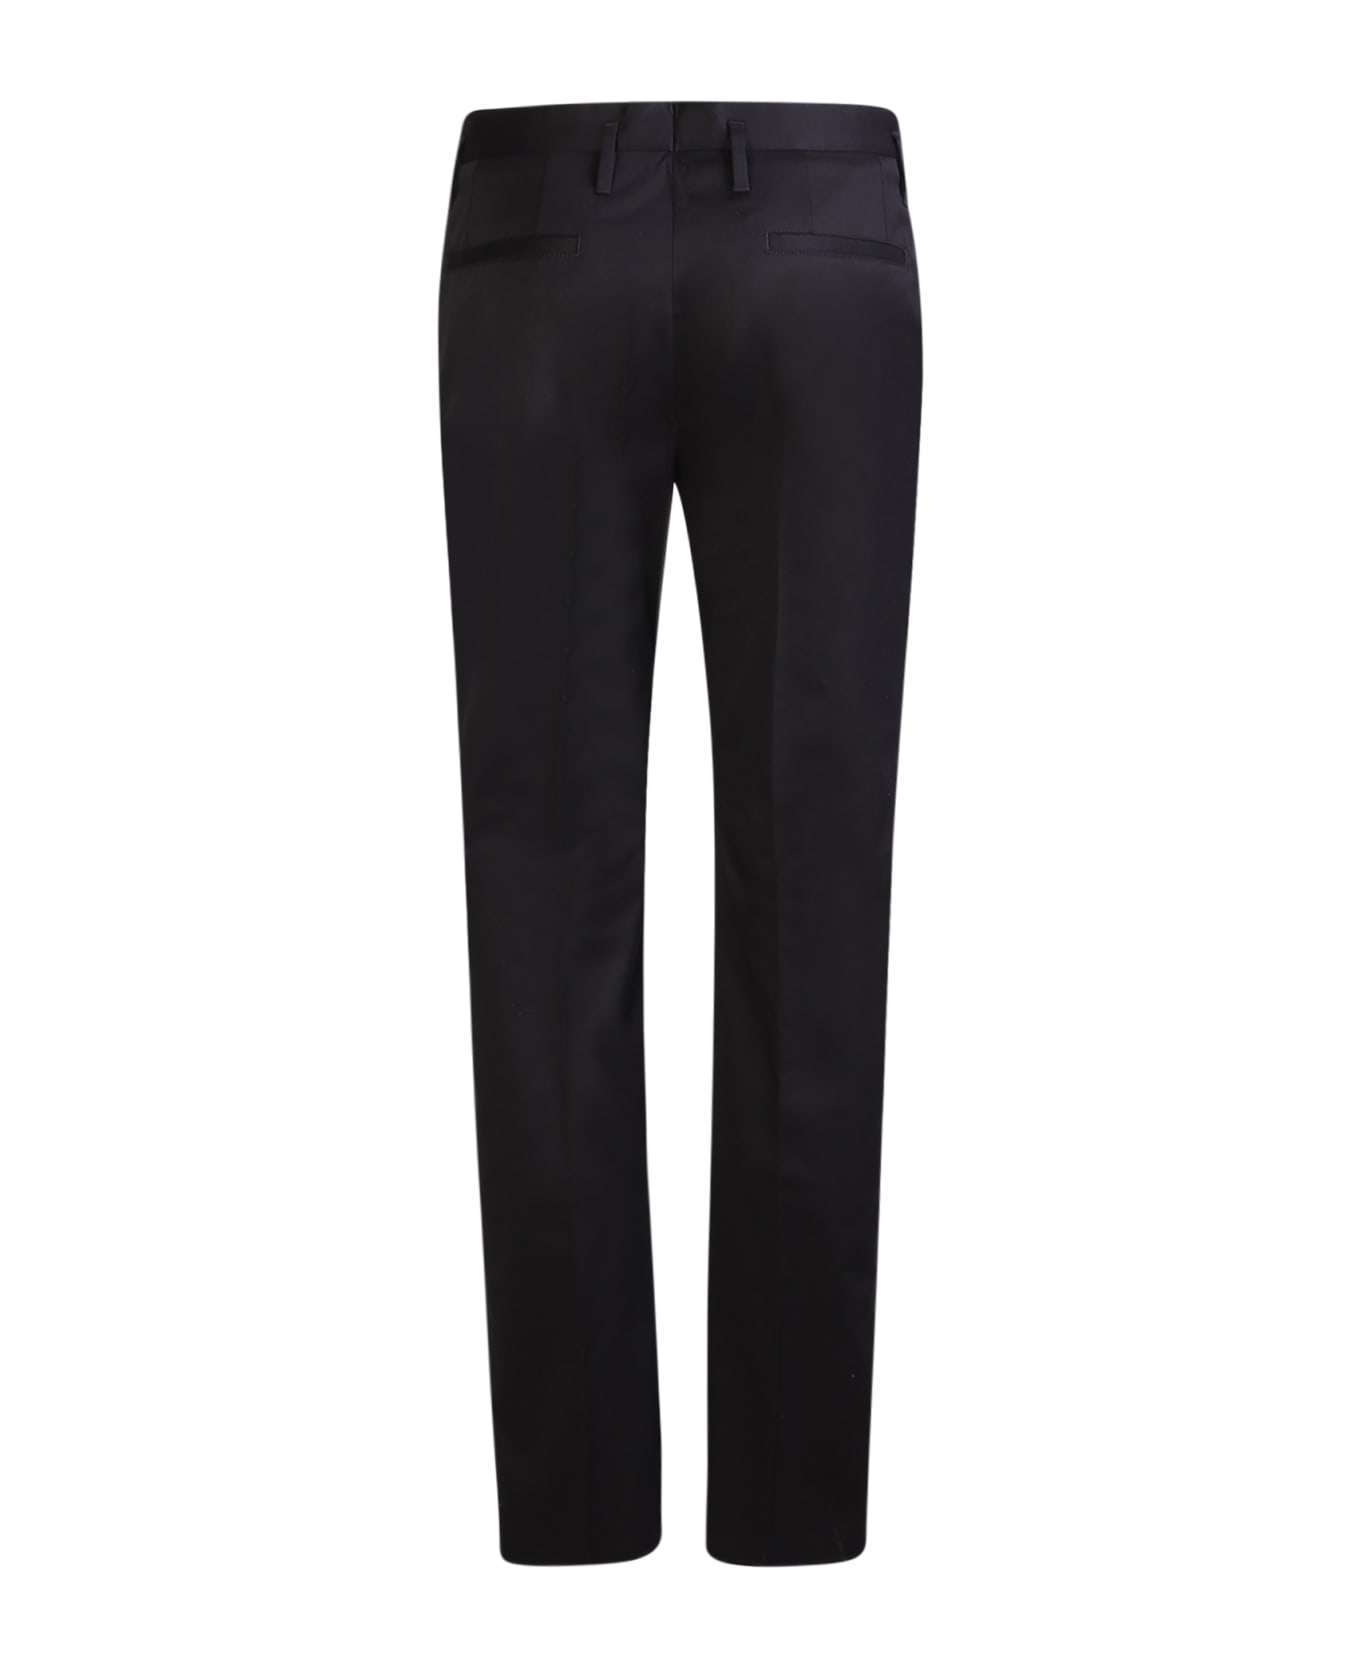 Dolce & Gabbana Tailored Trousers - Black ボトムス